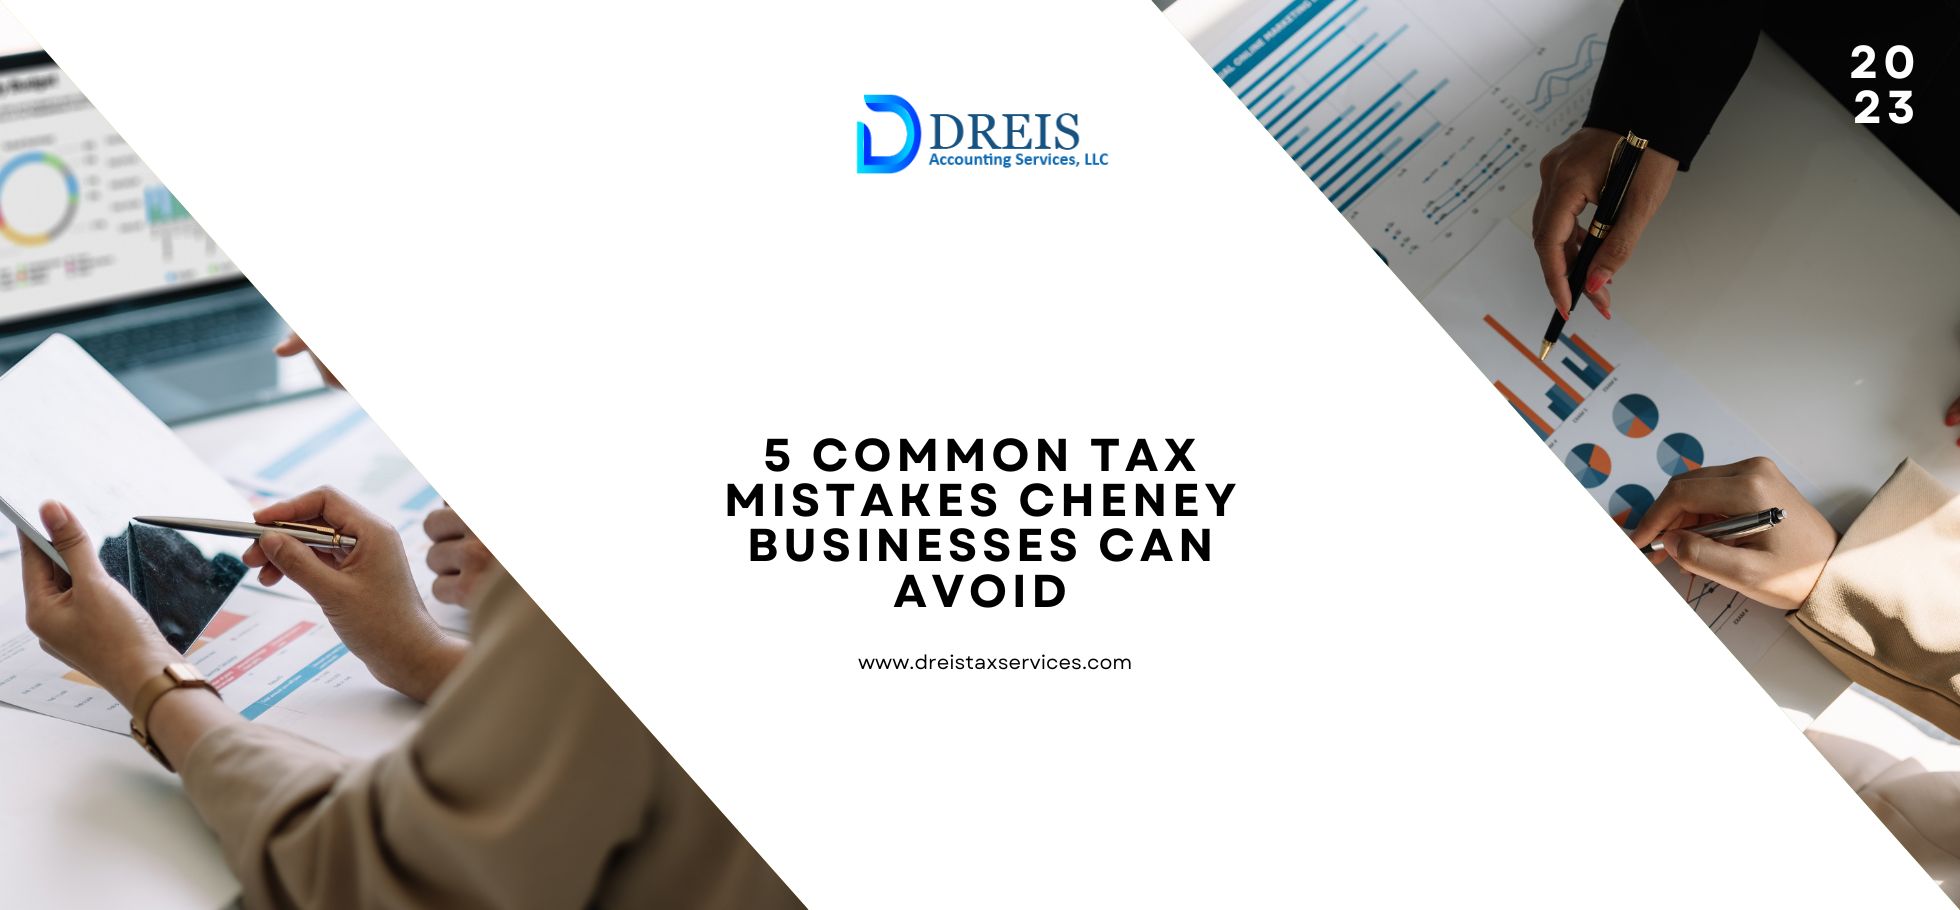 5 Common Tax Mistakes Cheney Businesses Can Avoid